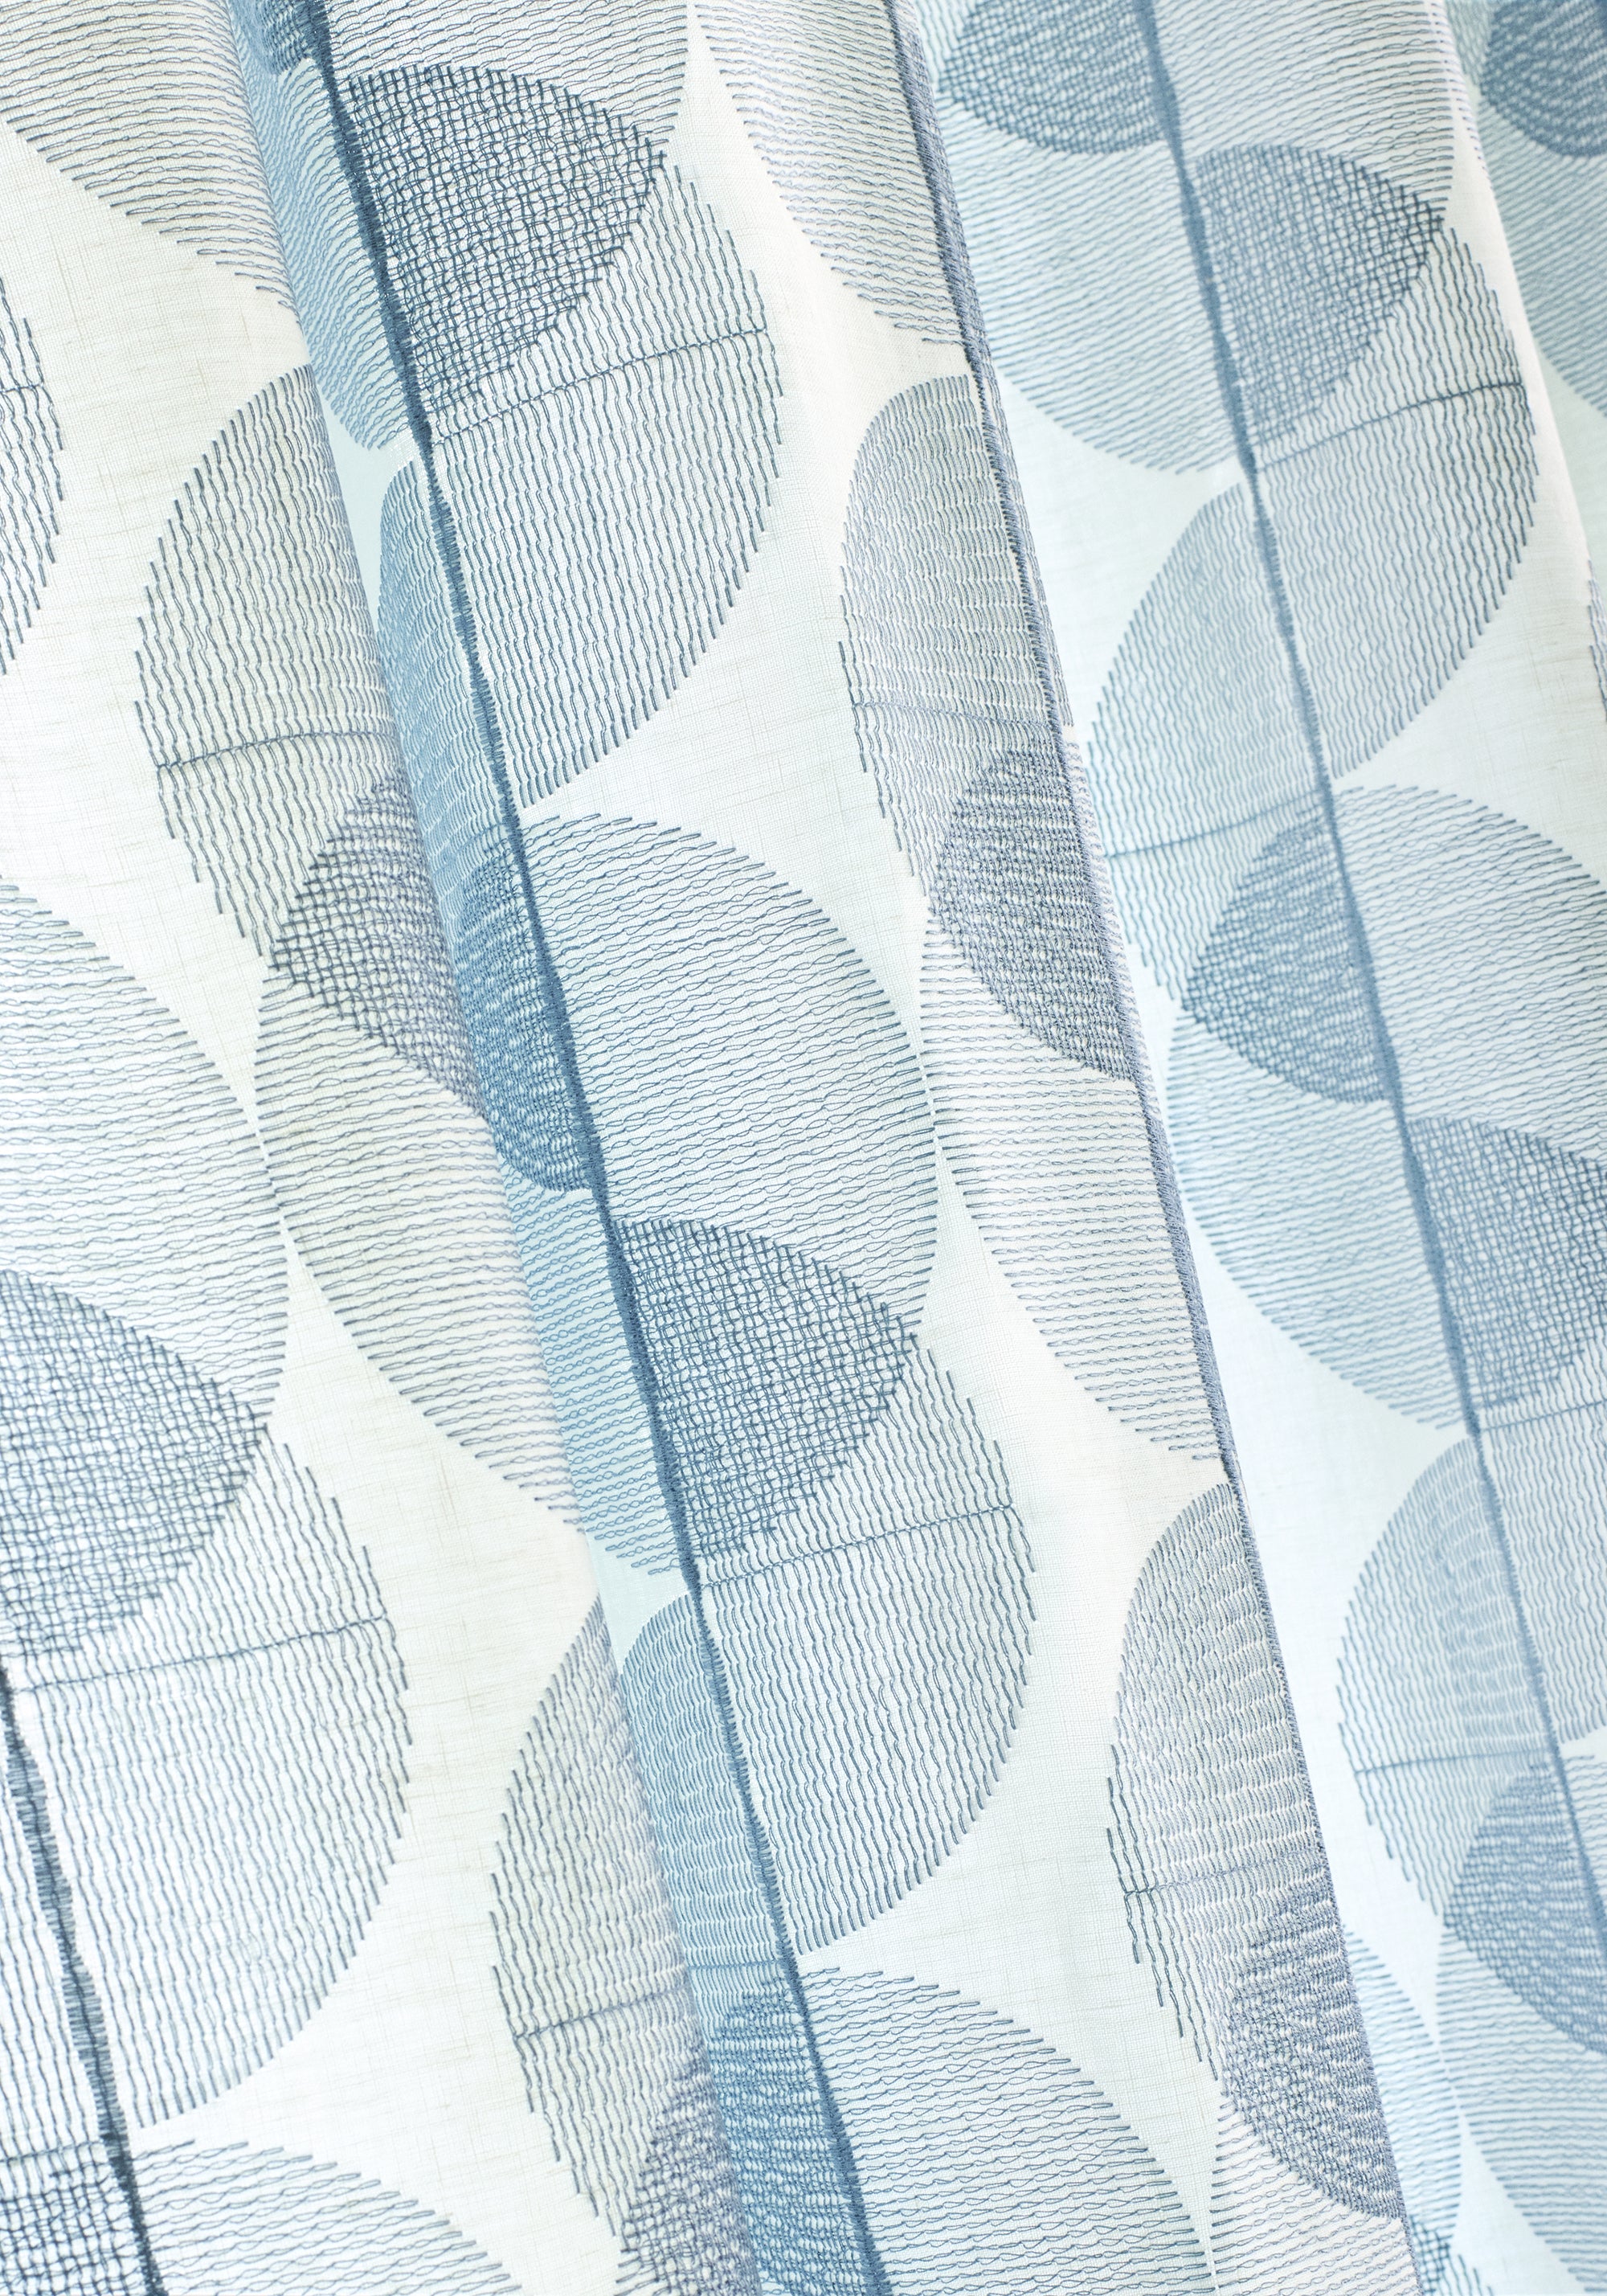 Up close sheer in Cyclone Embroidery fabric in ocean color - pattern number FWW8256 - by Thibaut in the Aura collection